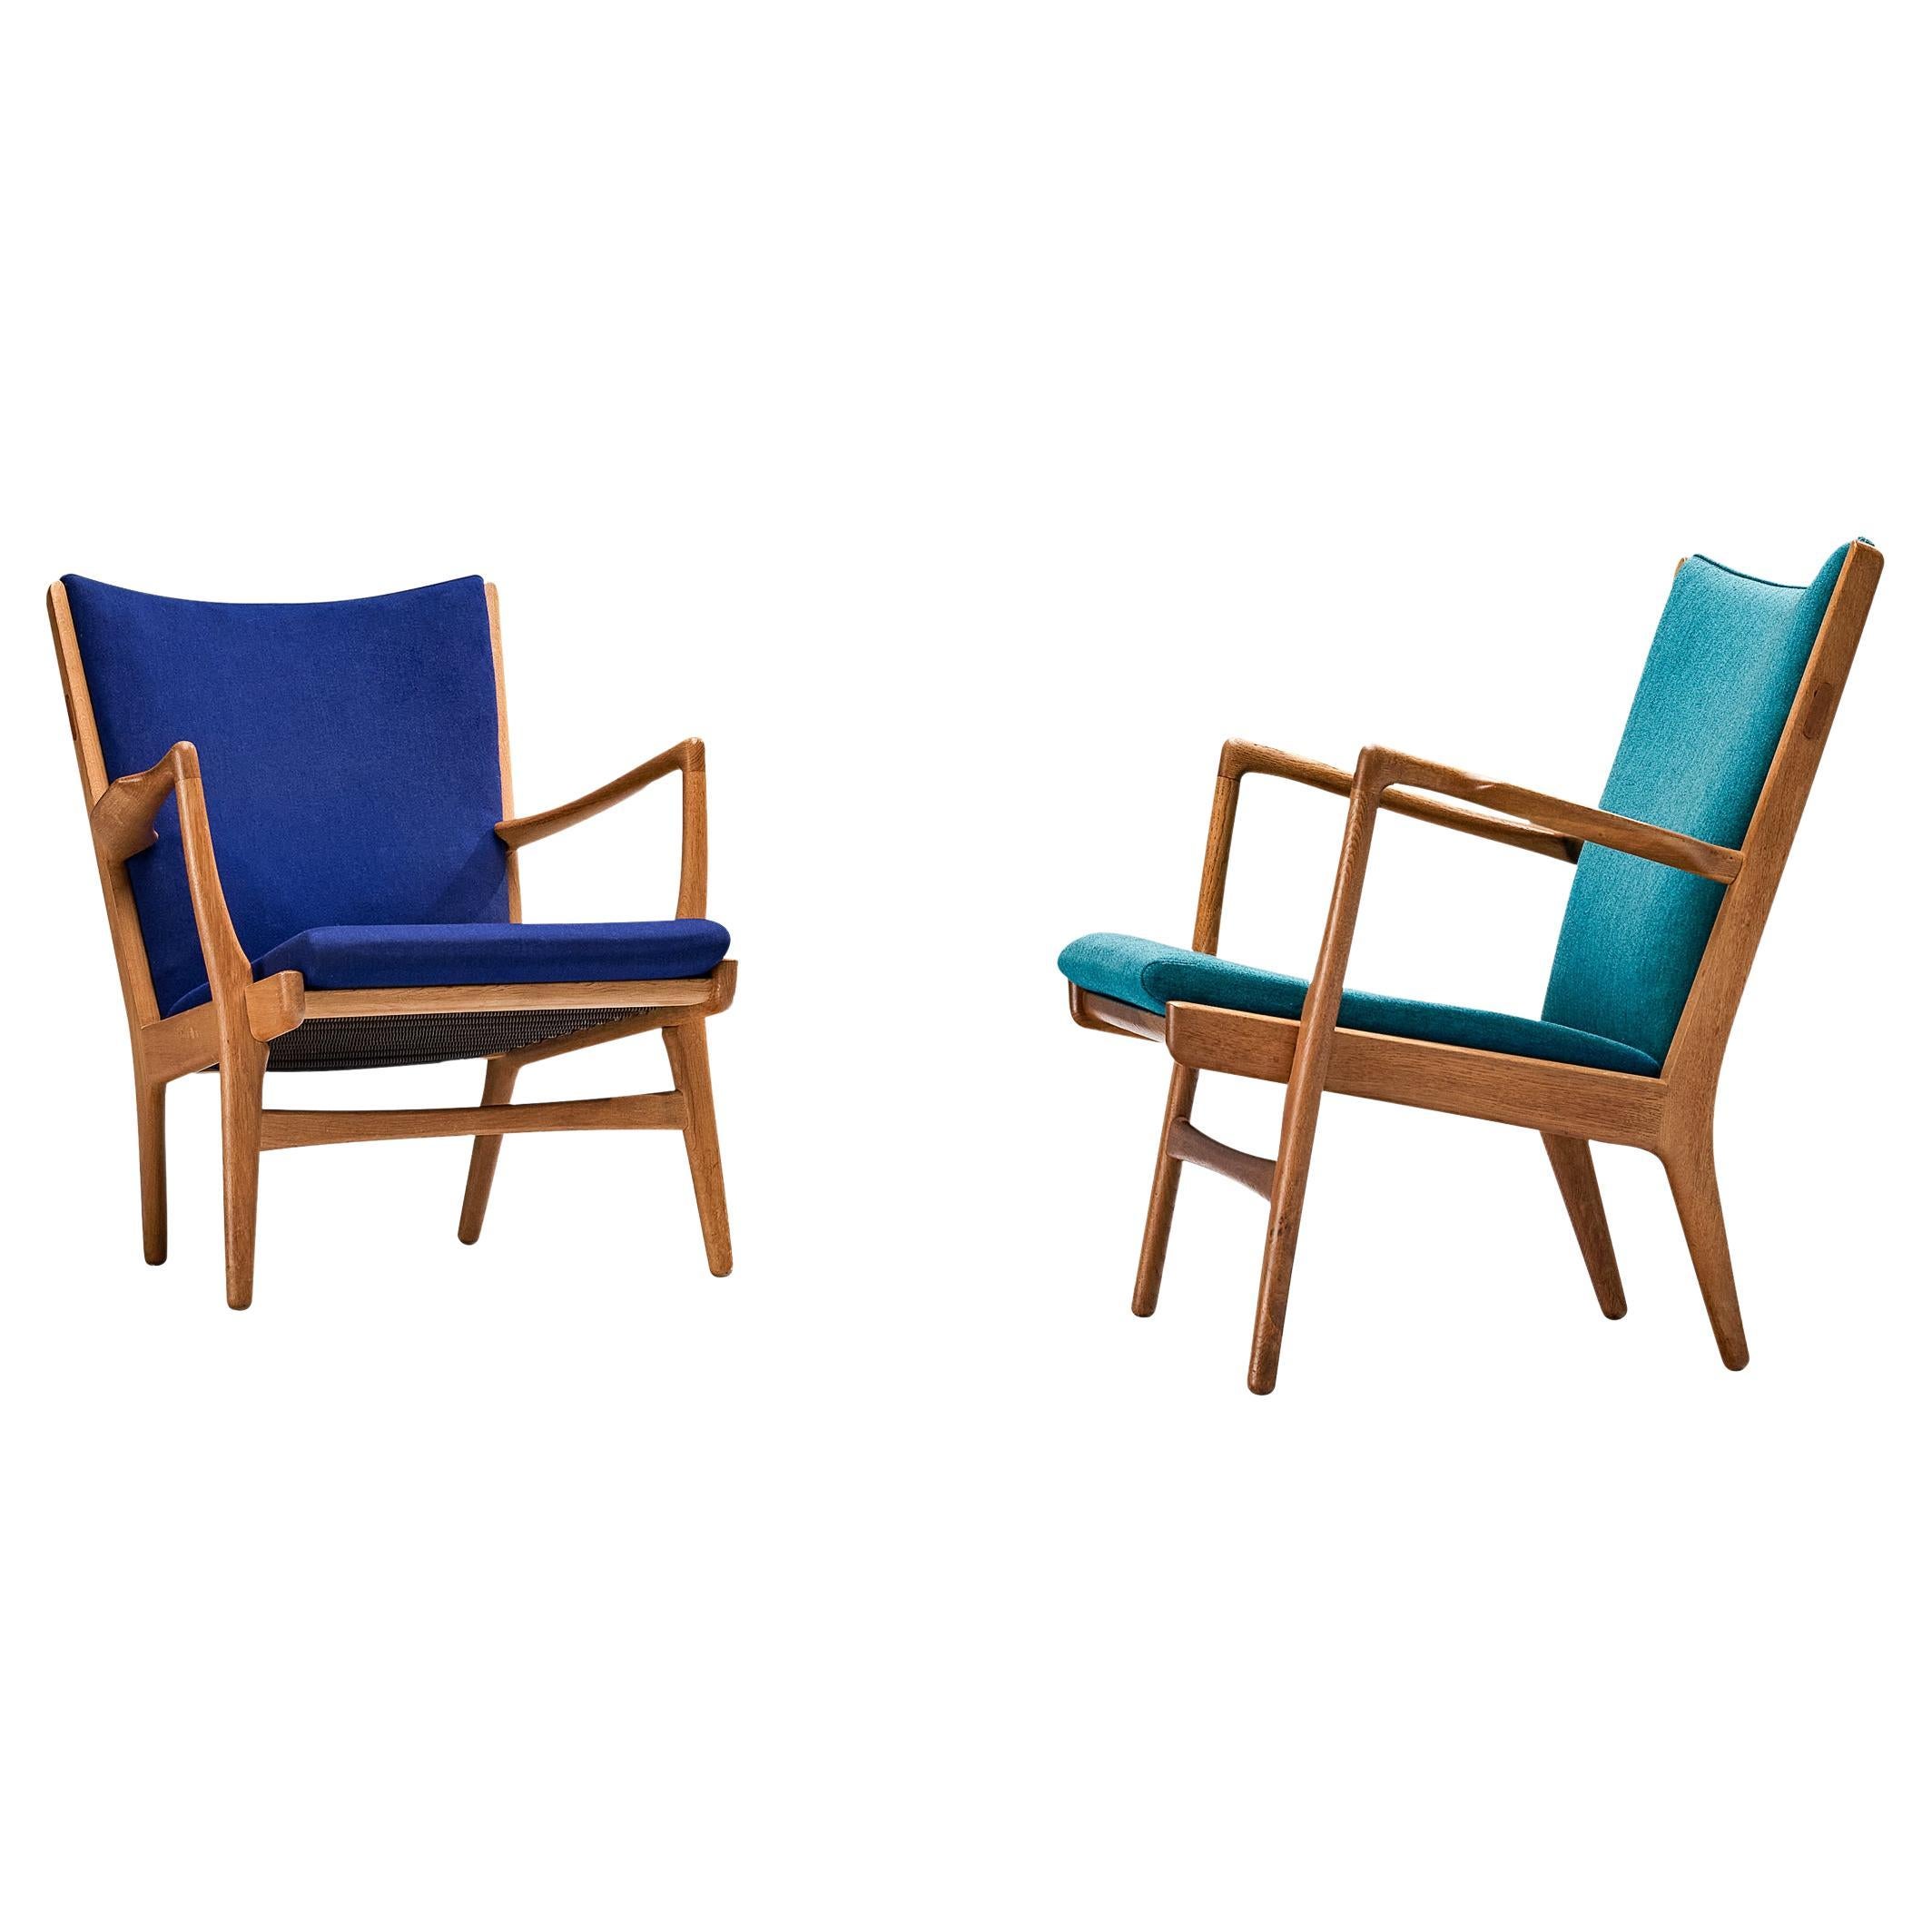 A.P. Stolen Lounge Chairs